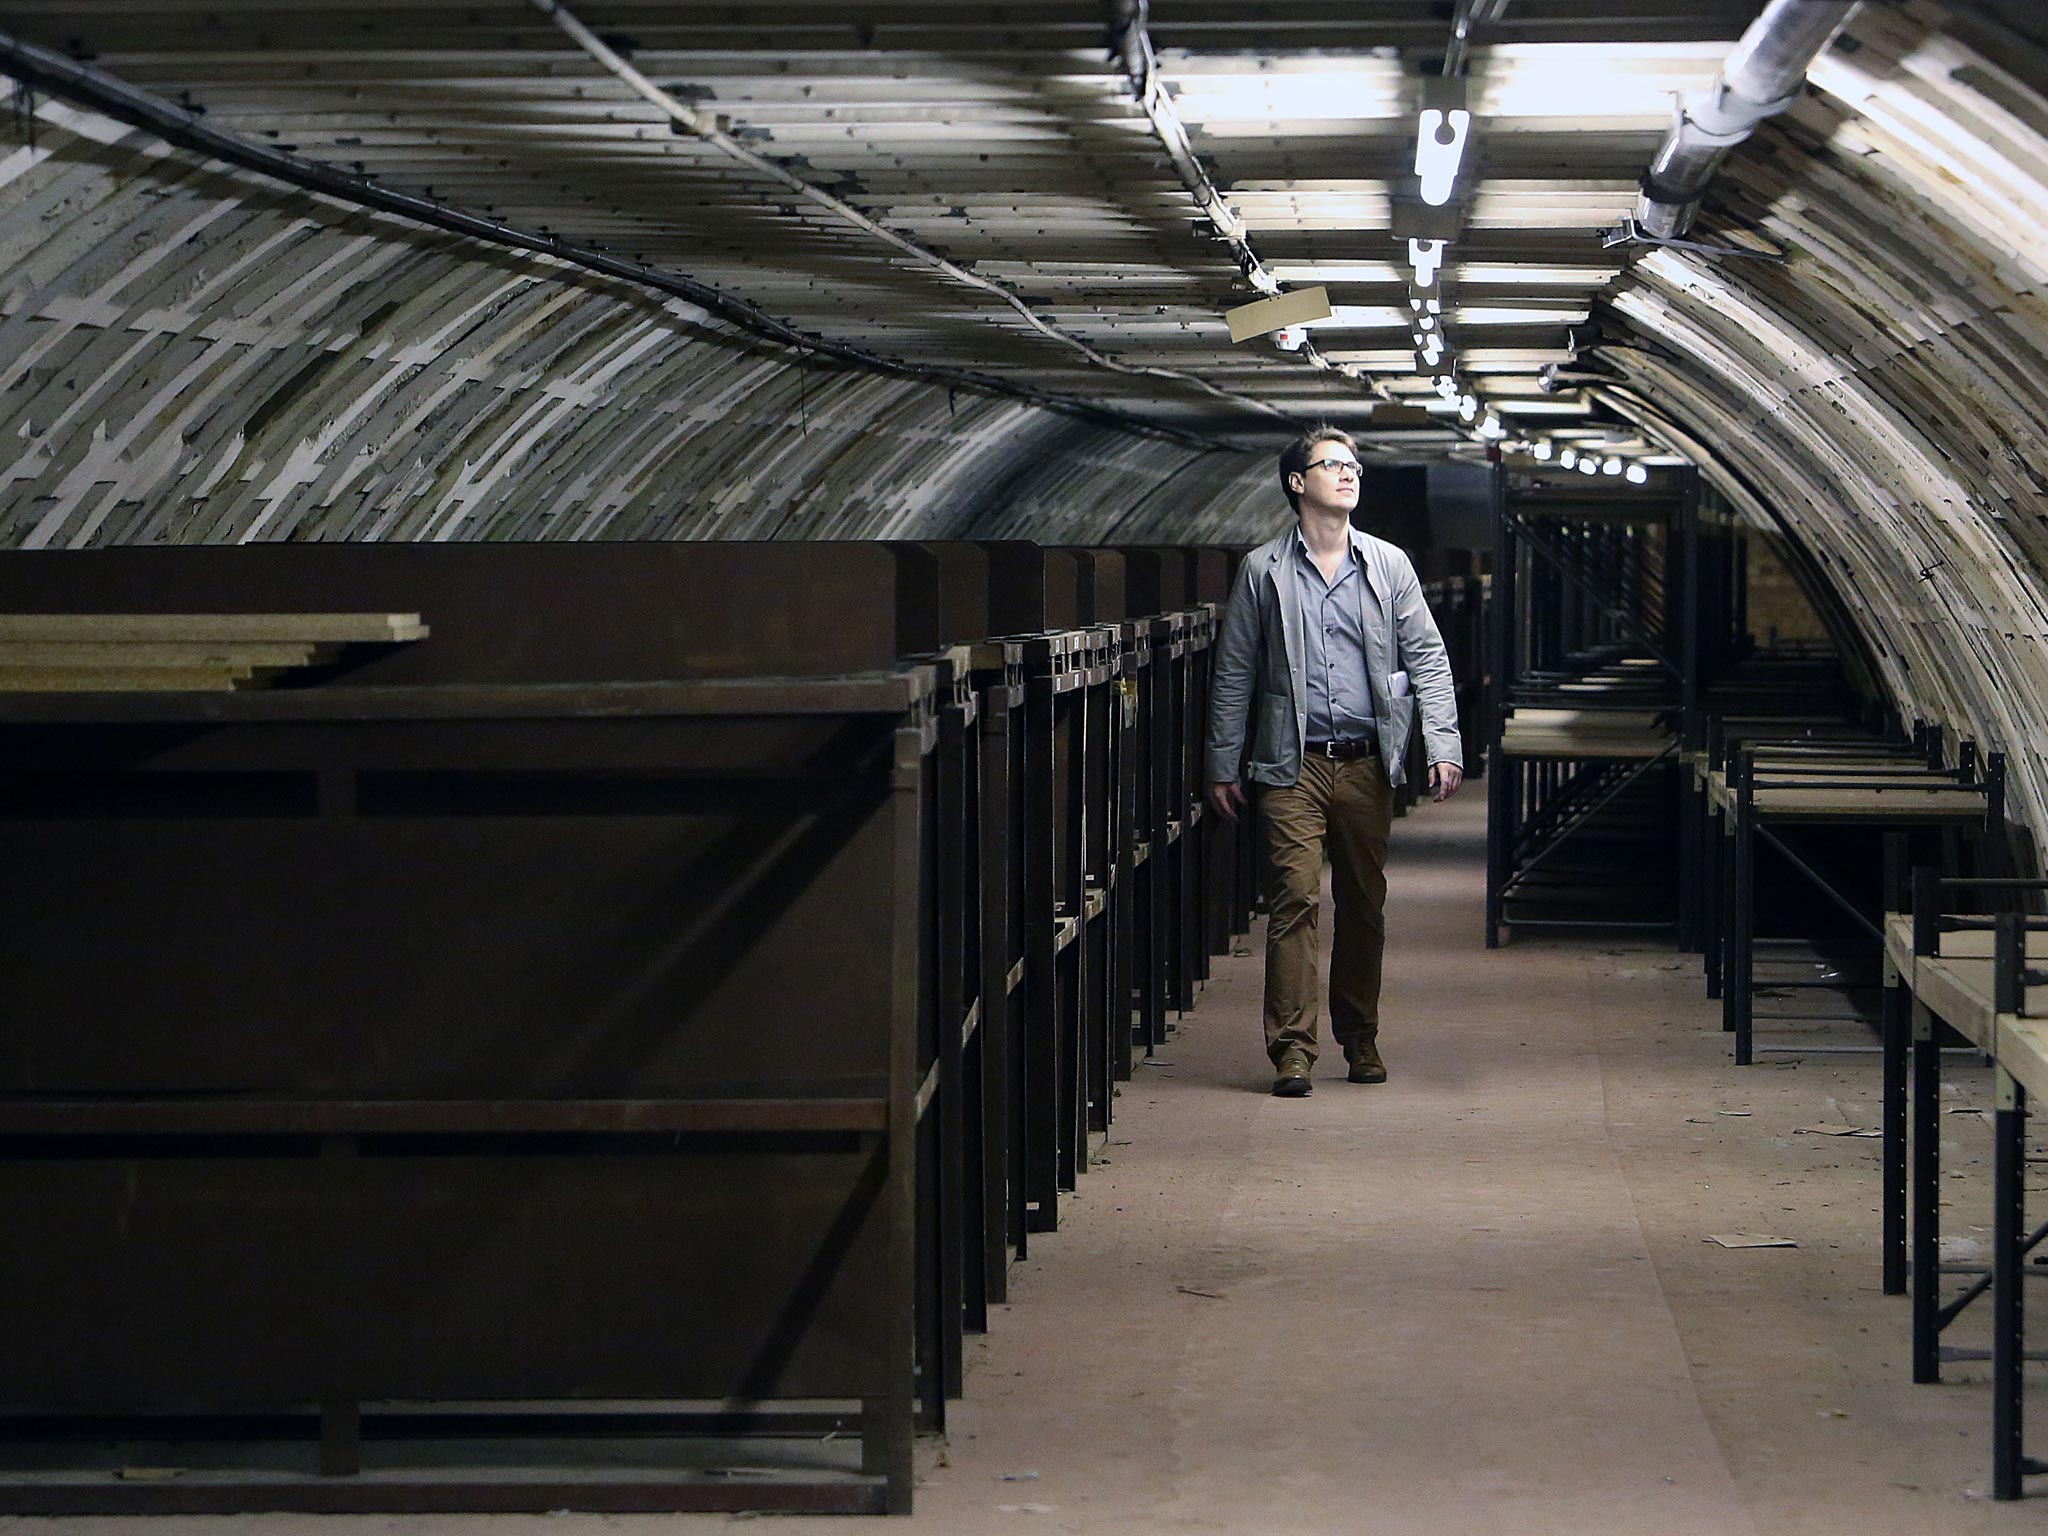 The Independent's Jamie Merrill examines the World War II bunk beds in a deep level WWII air raid shelter beneath Clapham Common Underground Station